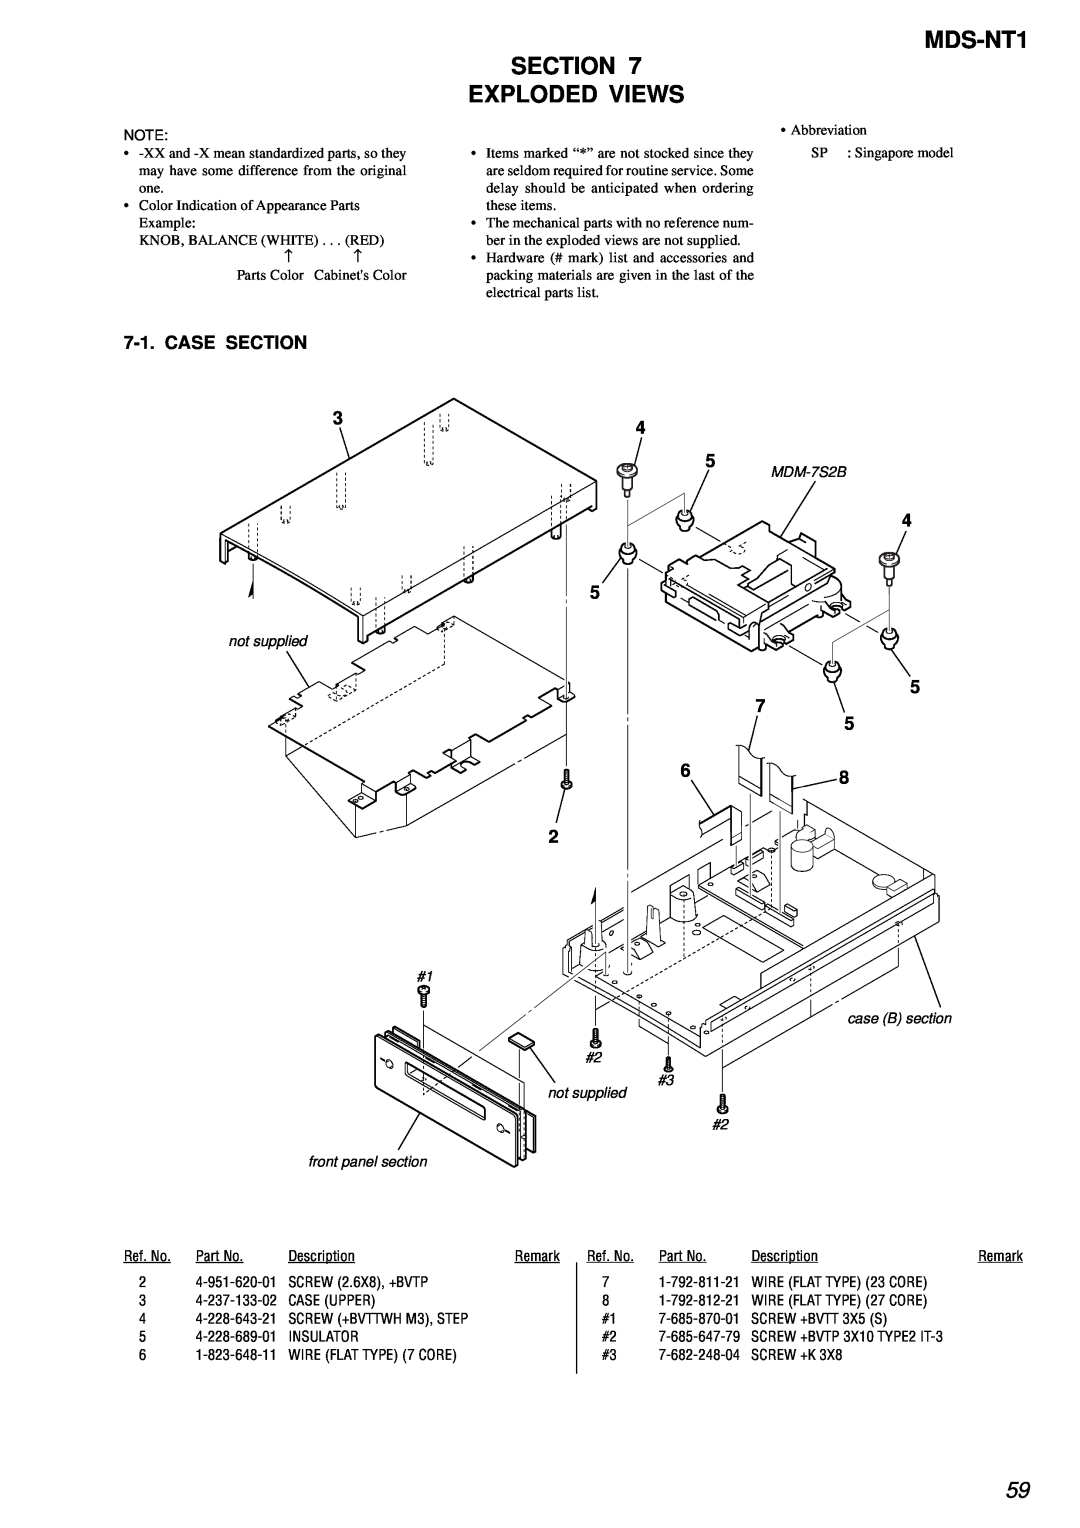 Sony MDS-NT1 service manual Exploded Views, Case Section 